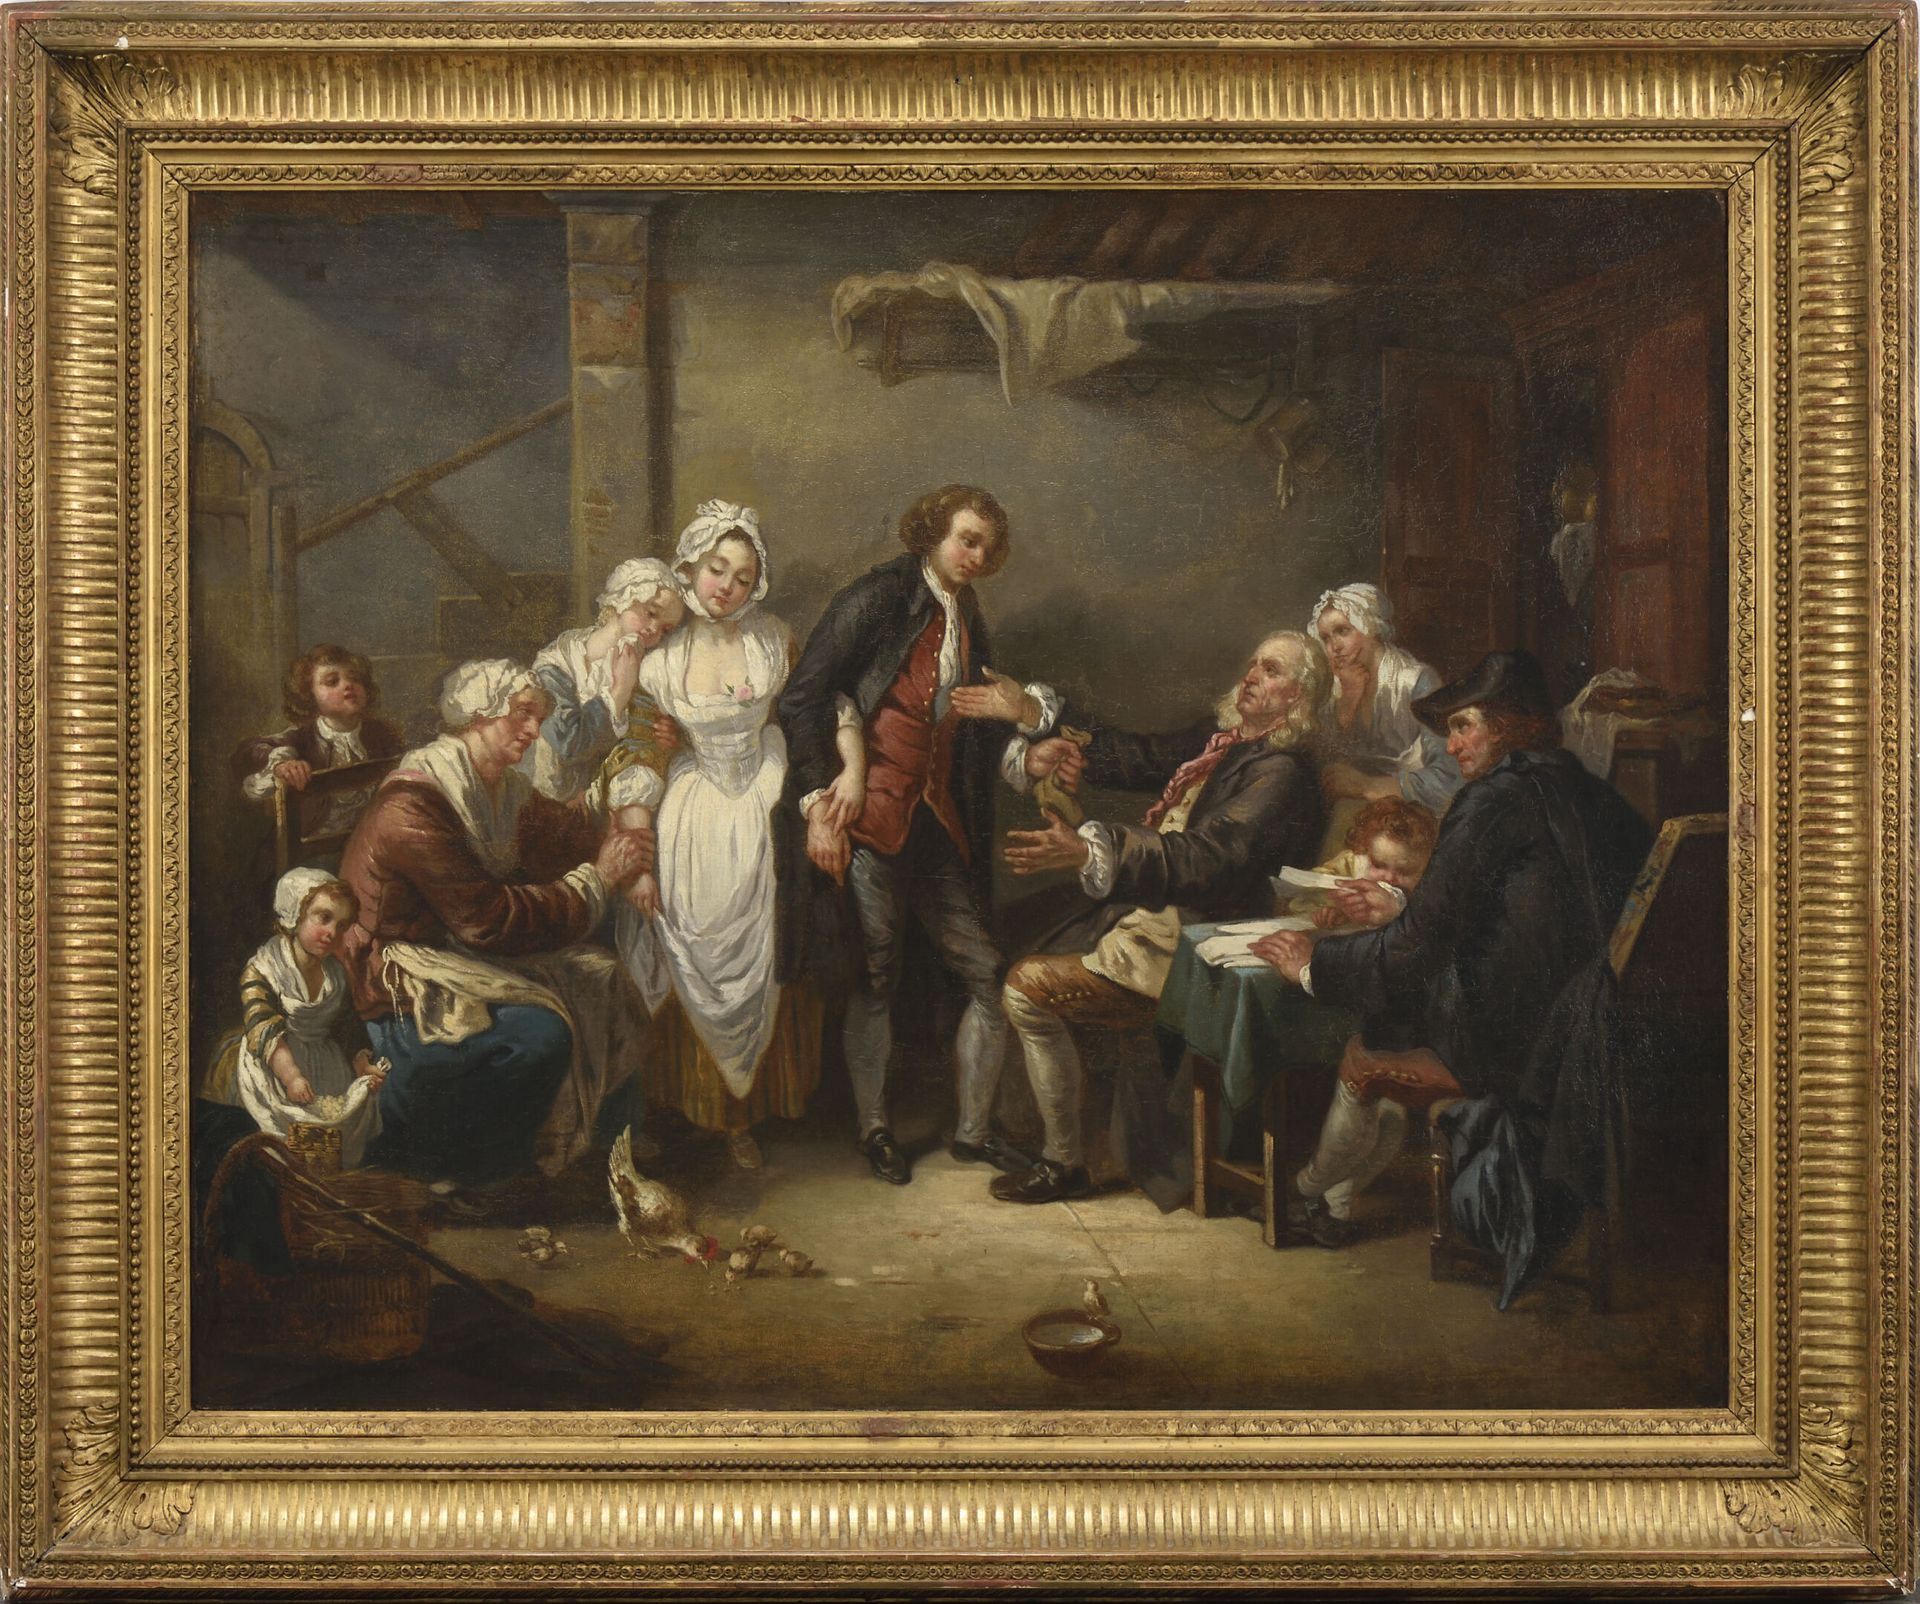 Null 19th century FRENCH school, after Jean-Baptiste GREUZE (1725-1805)
The Vill&hellip;